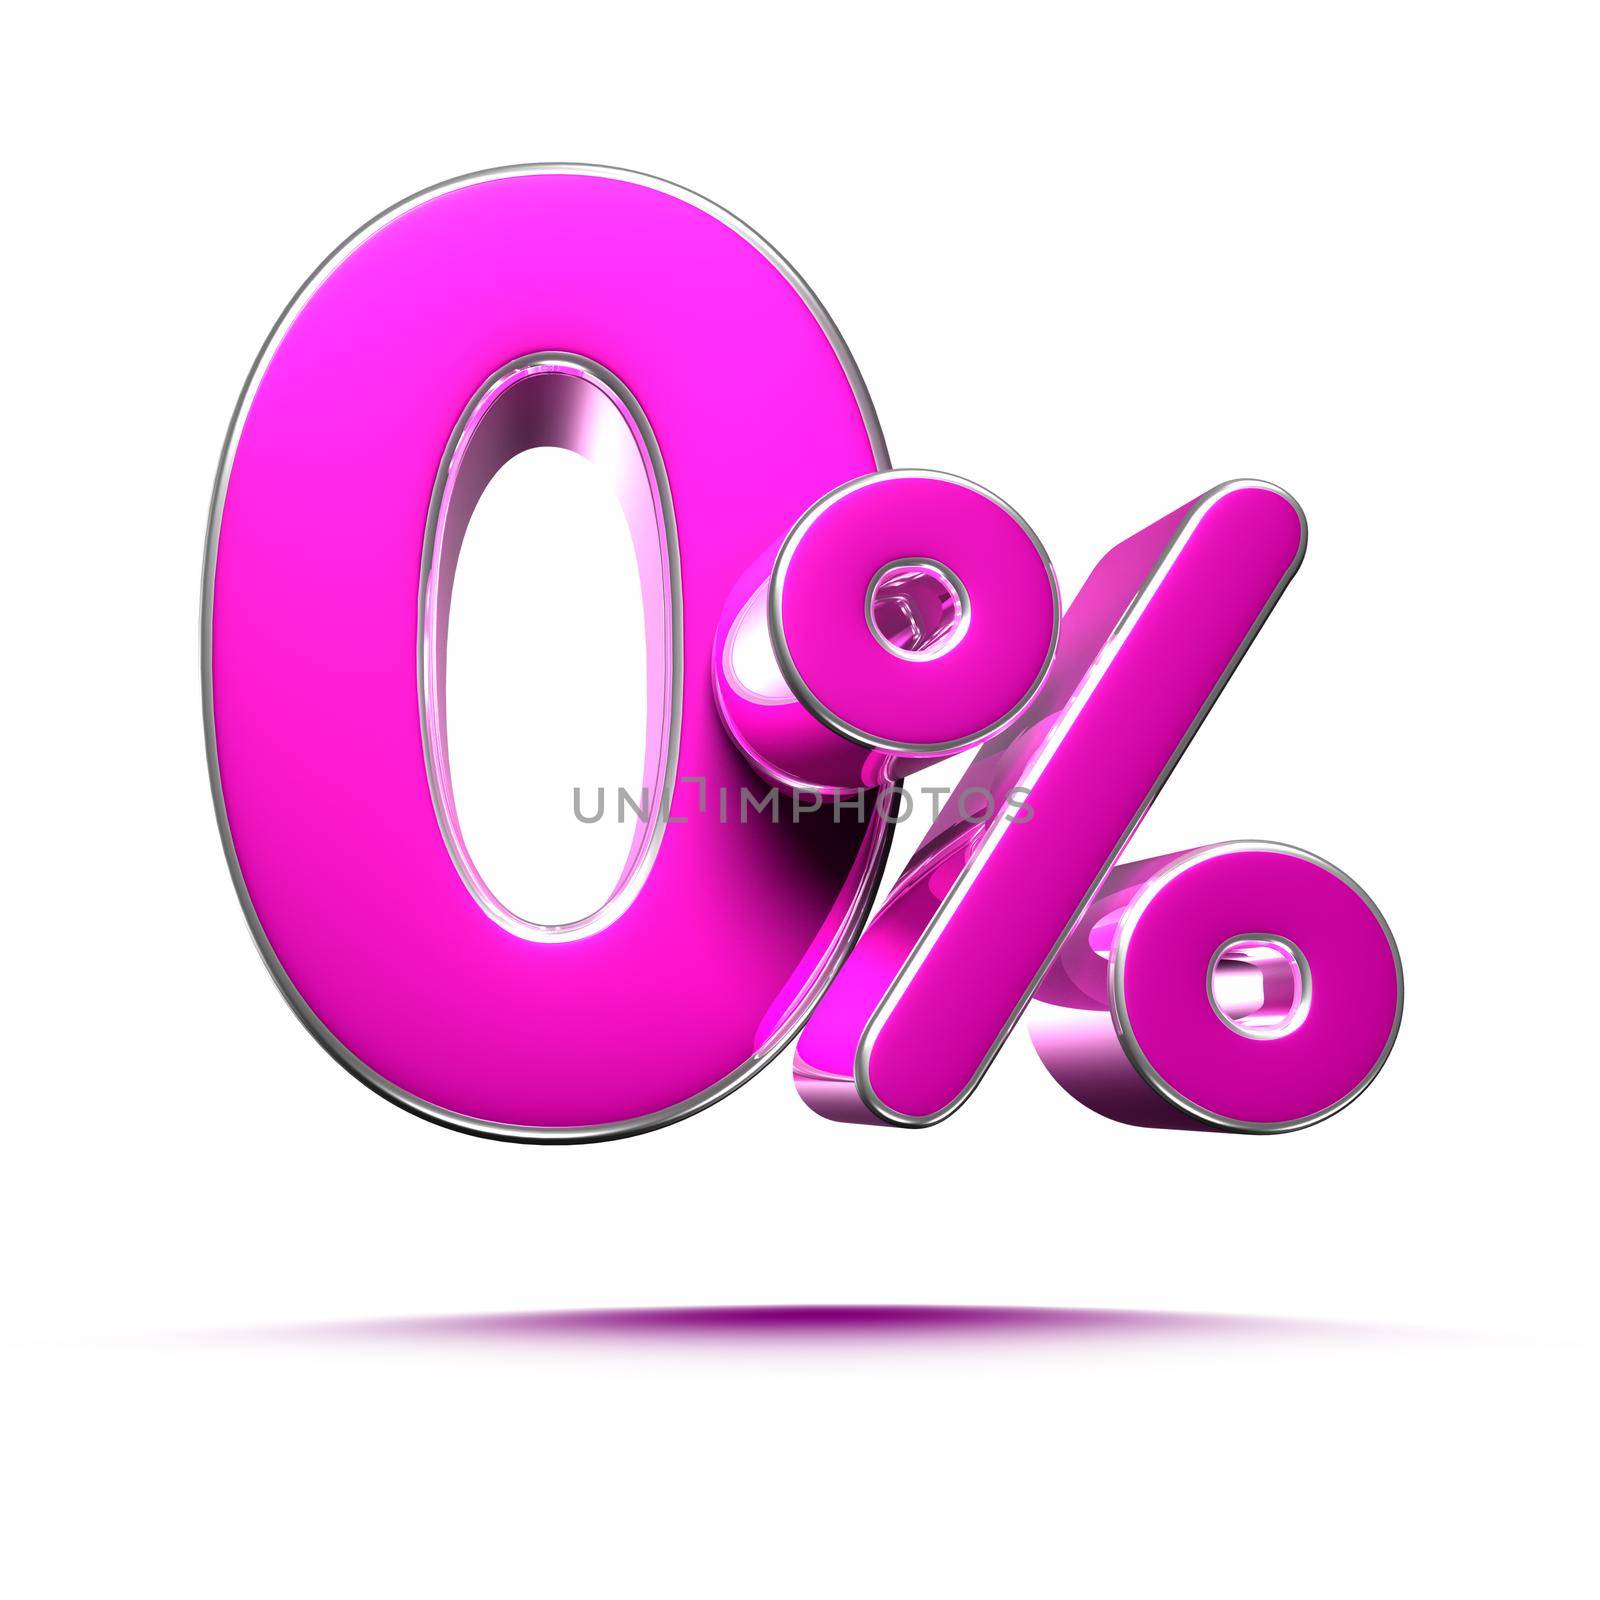 Pink 0 Percent 3d illustration Sign on White Background, Special Offer 0% Discount Tag, Sale Up to 0 Percent Off,share 0 percent,0% off storewide.With clipping path.